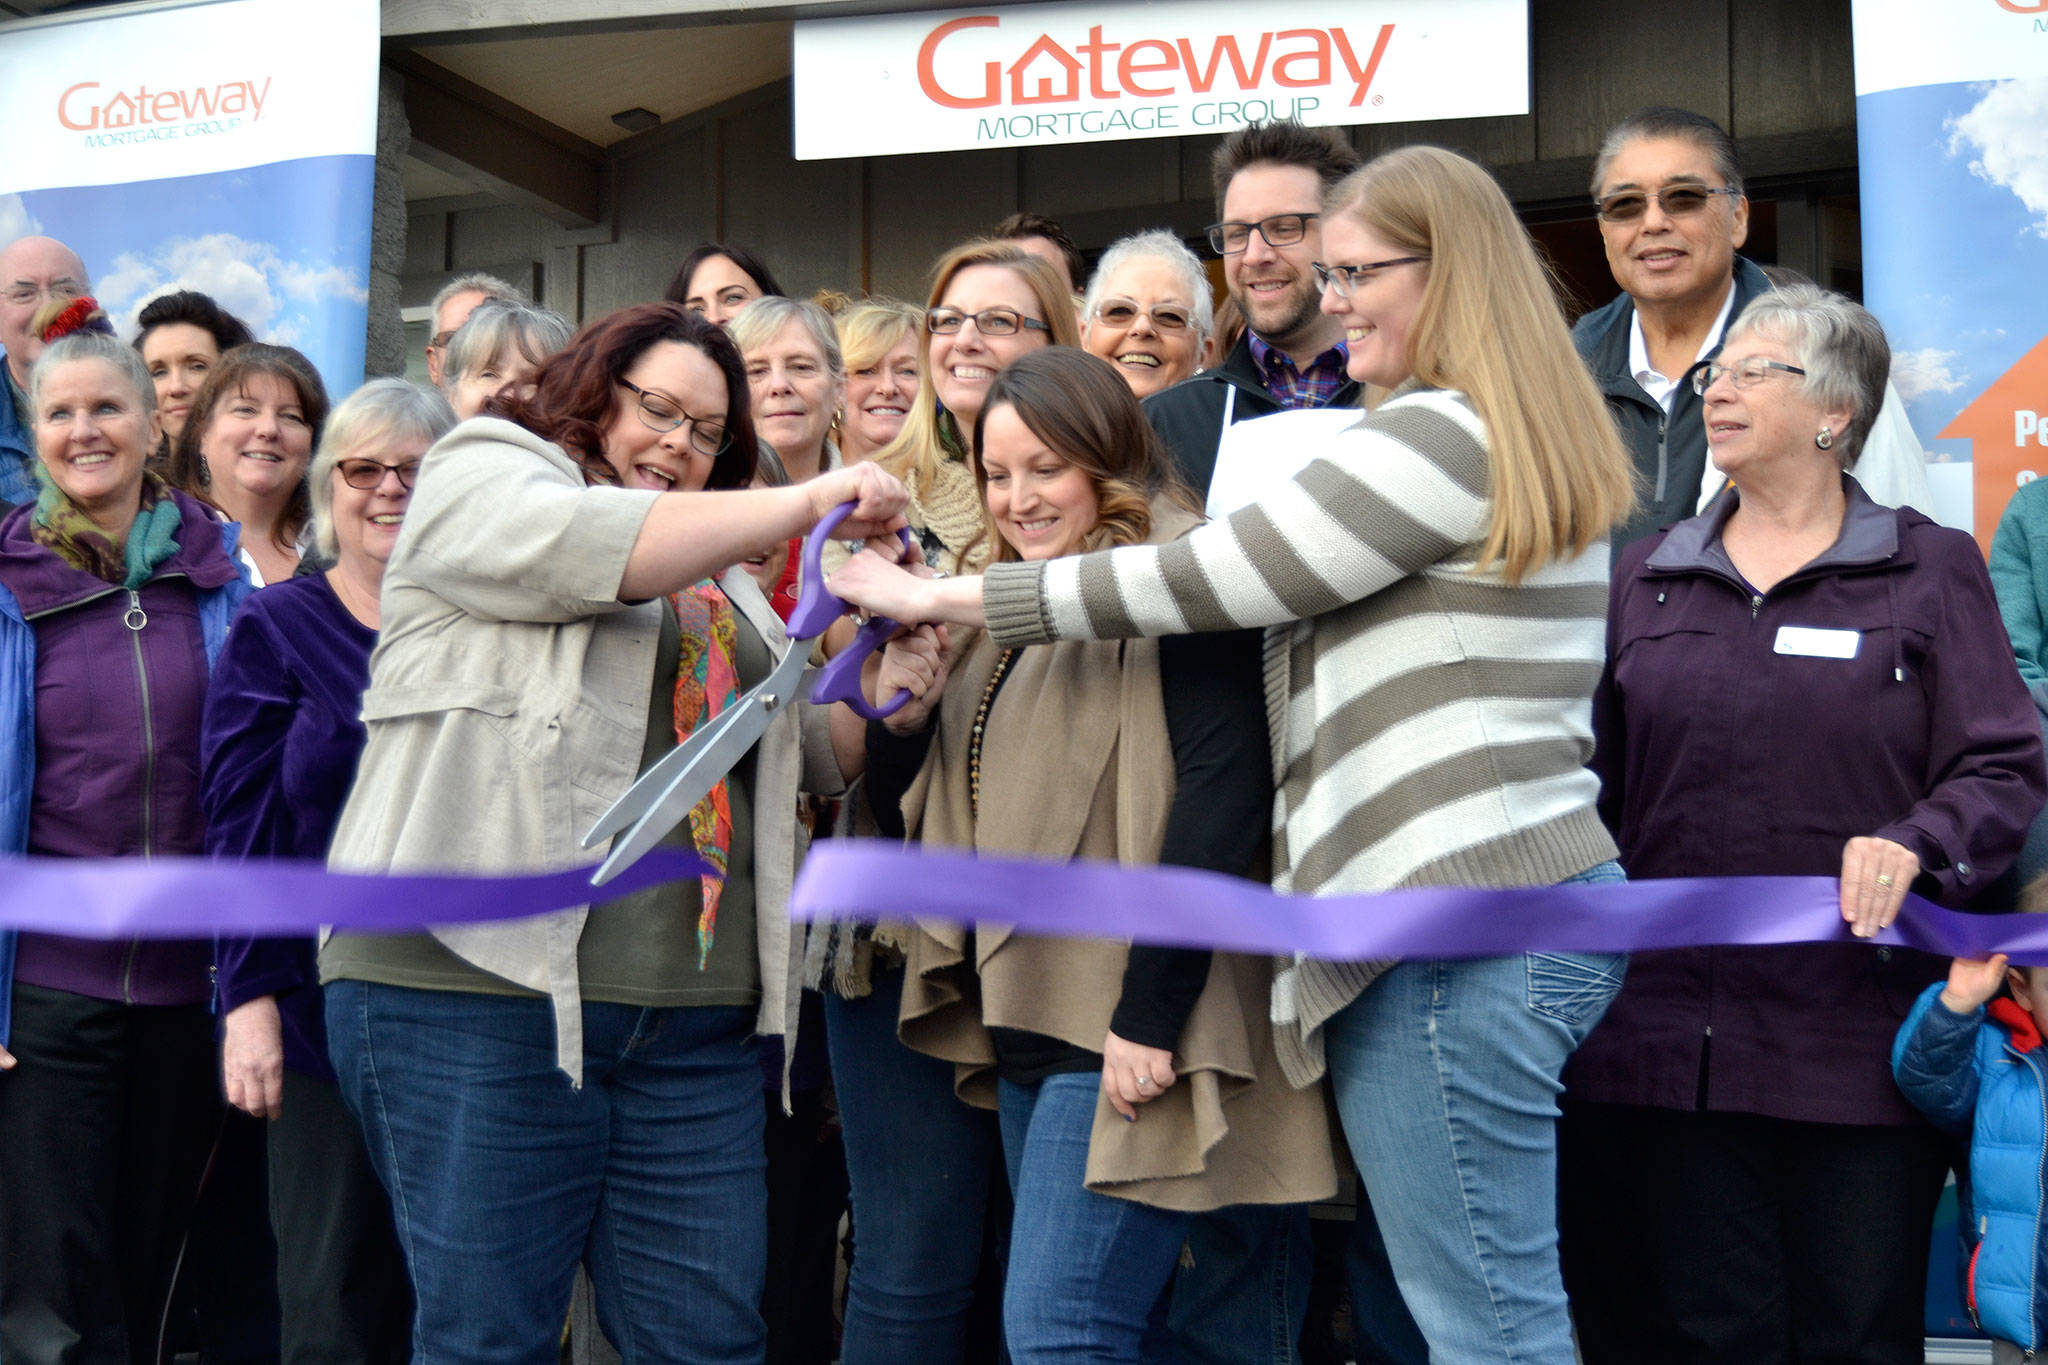 Staff with Sequim’s Gateway Mortgage Group, from front left, Deon Kapetan, Amy Phillips, Stephanie Sweet, and Jennifer Sweeney, cut the ribbon for the Sequim-Dungeness Chamber of Commerce to celebrate the Gateway’s grand opening on March 9. Sequim Gazette photo by Matthew Nash